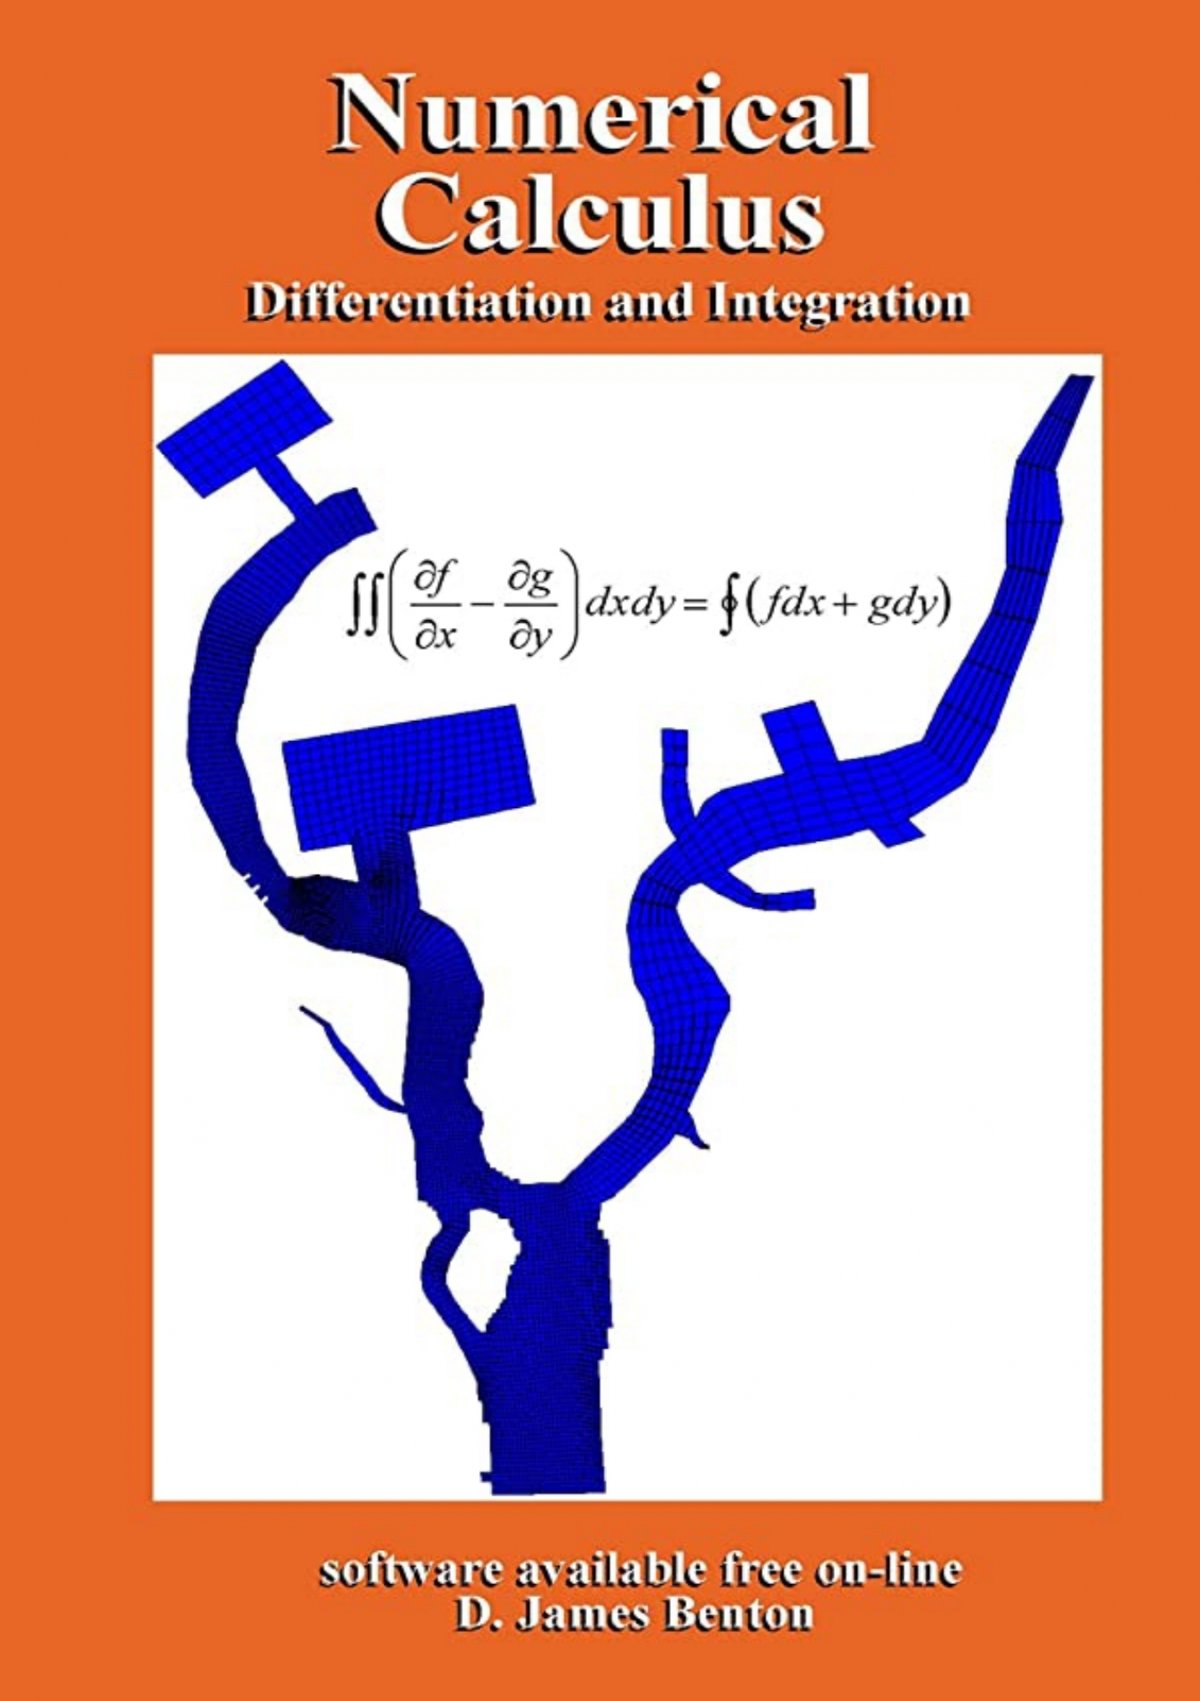 numerical differentiation solved examples pdf